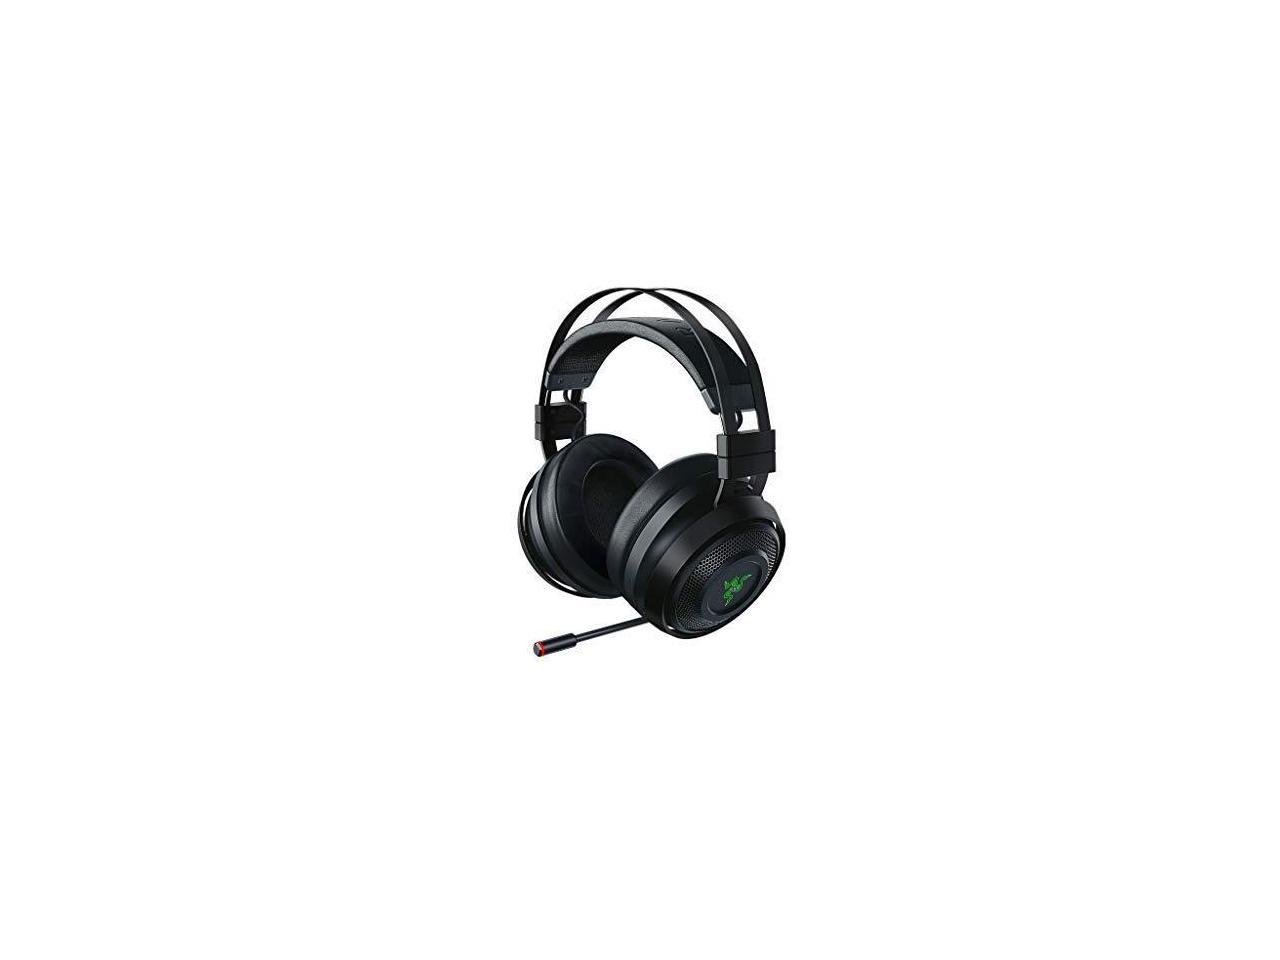 Razer Nari Ultimate Thx Spatial Audio Hypersense Technology 2 4ghz Wireless Audio Cooling Gel Infused Cushions Gaming Headset Works With Pc Ps4 Xbox One Switch Mobile Devices Newegg Com